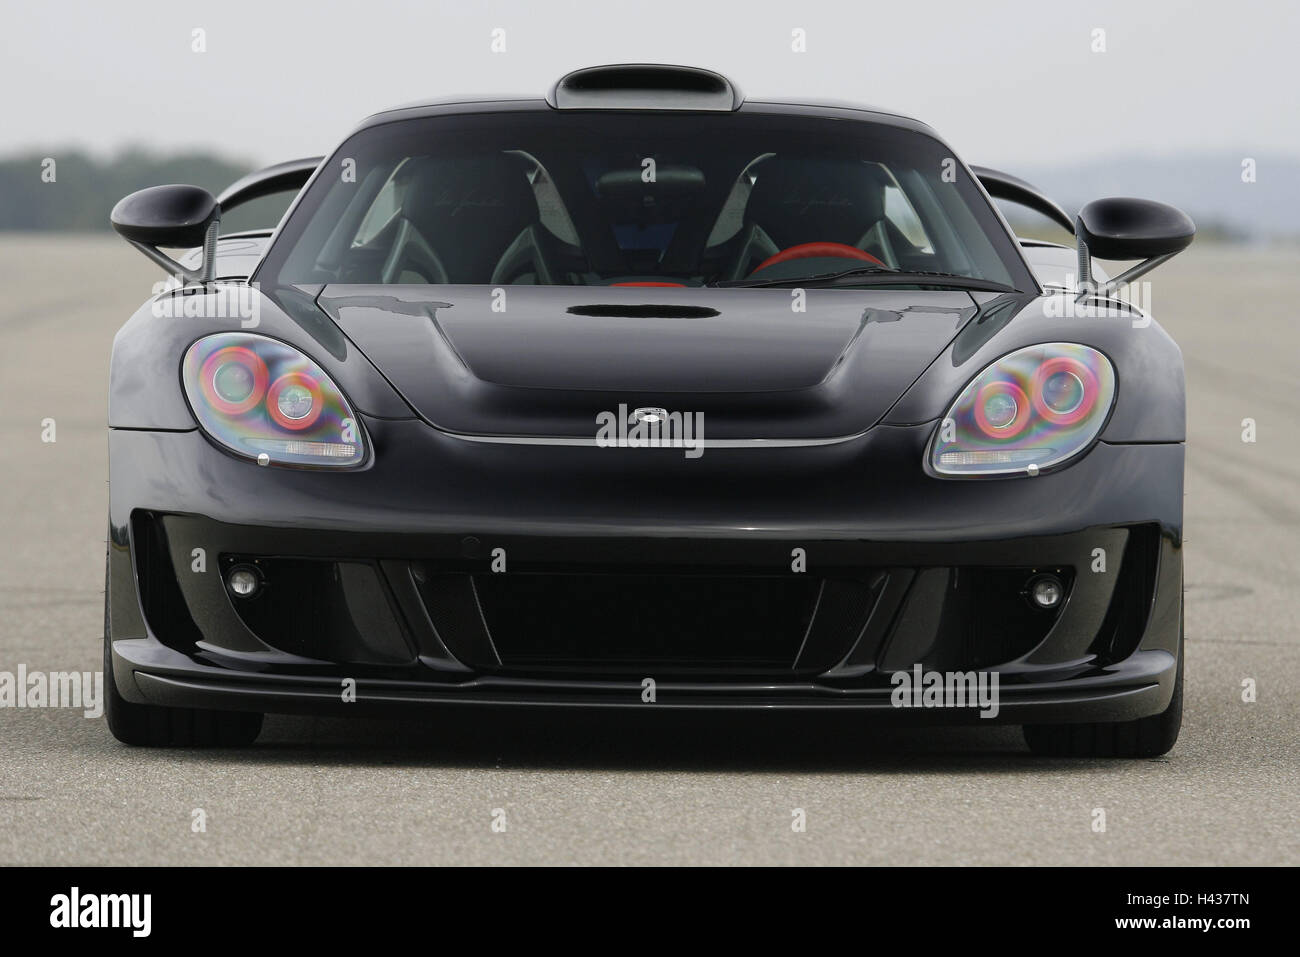 Porsche Gemballa Mirage GT, black, front view, car, outside, Gemballa, Gemballa mood, mood, luxury, luxury car, Porsche-Mirage-GT, Porsche, front, sports car, nobly, exclusively, Stock Photo